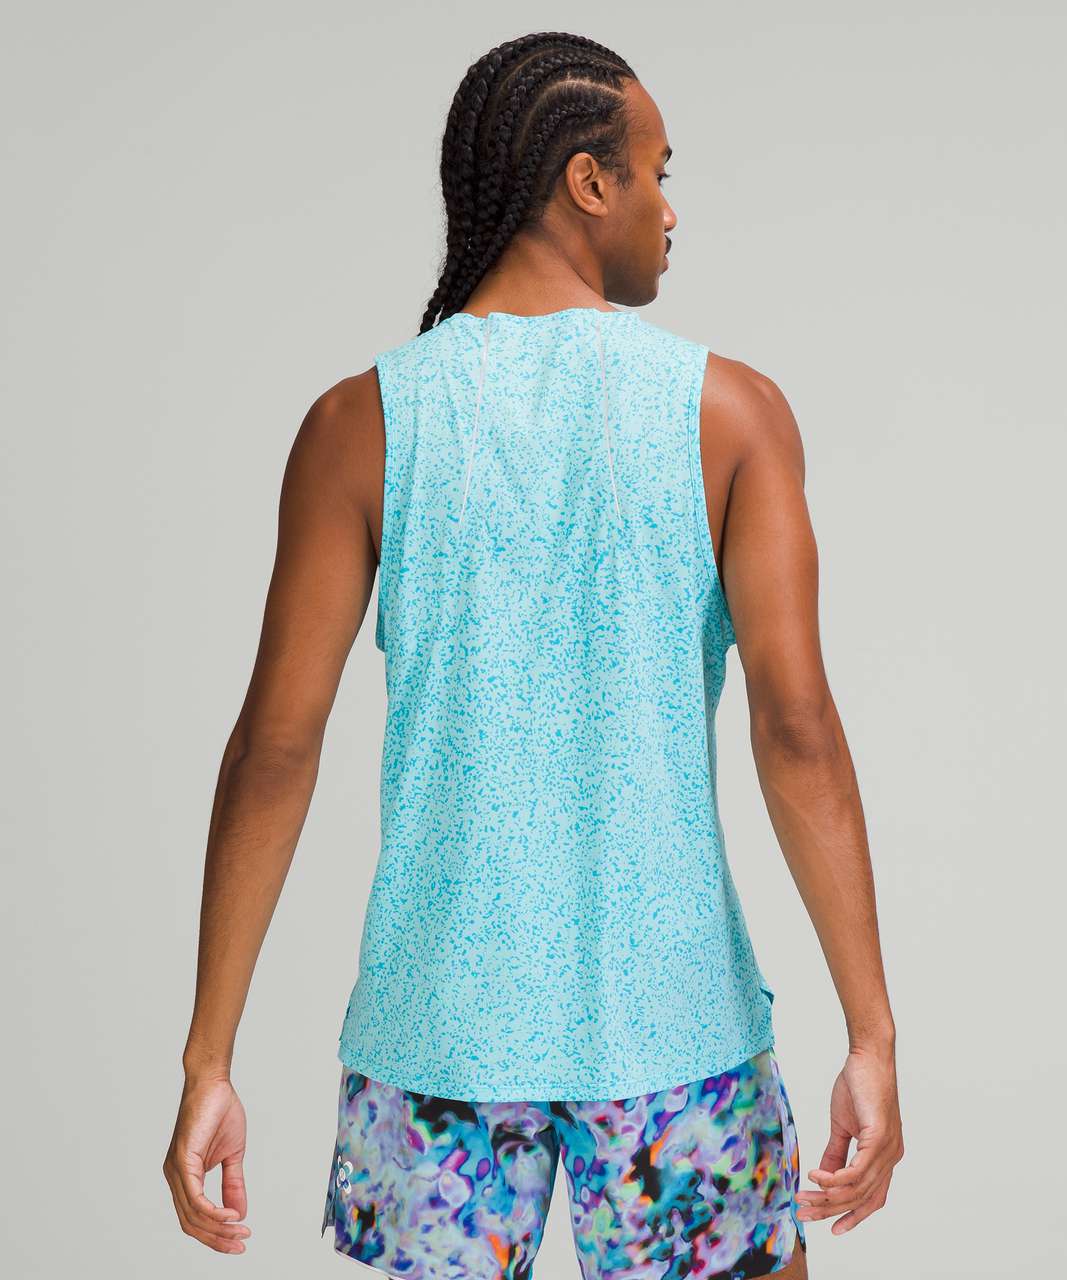 Lululemon's SeaWheeze Collection Is Available Online!